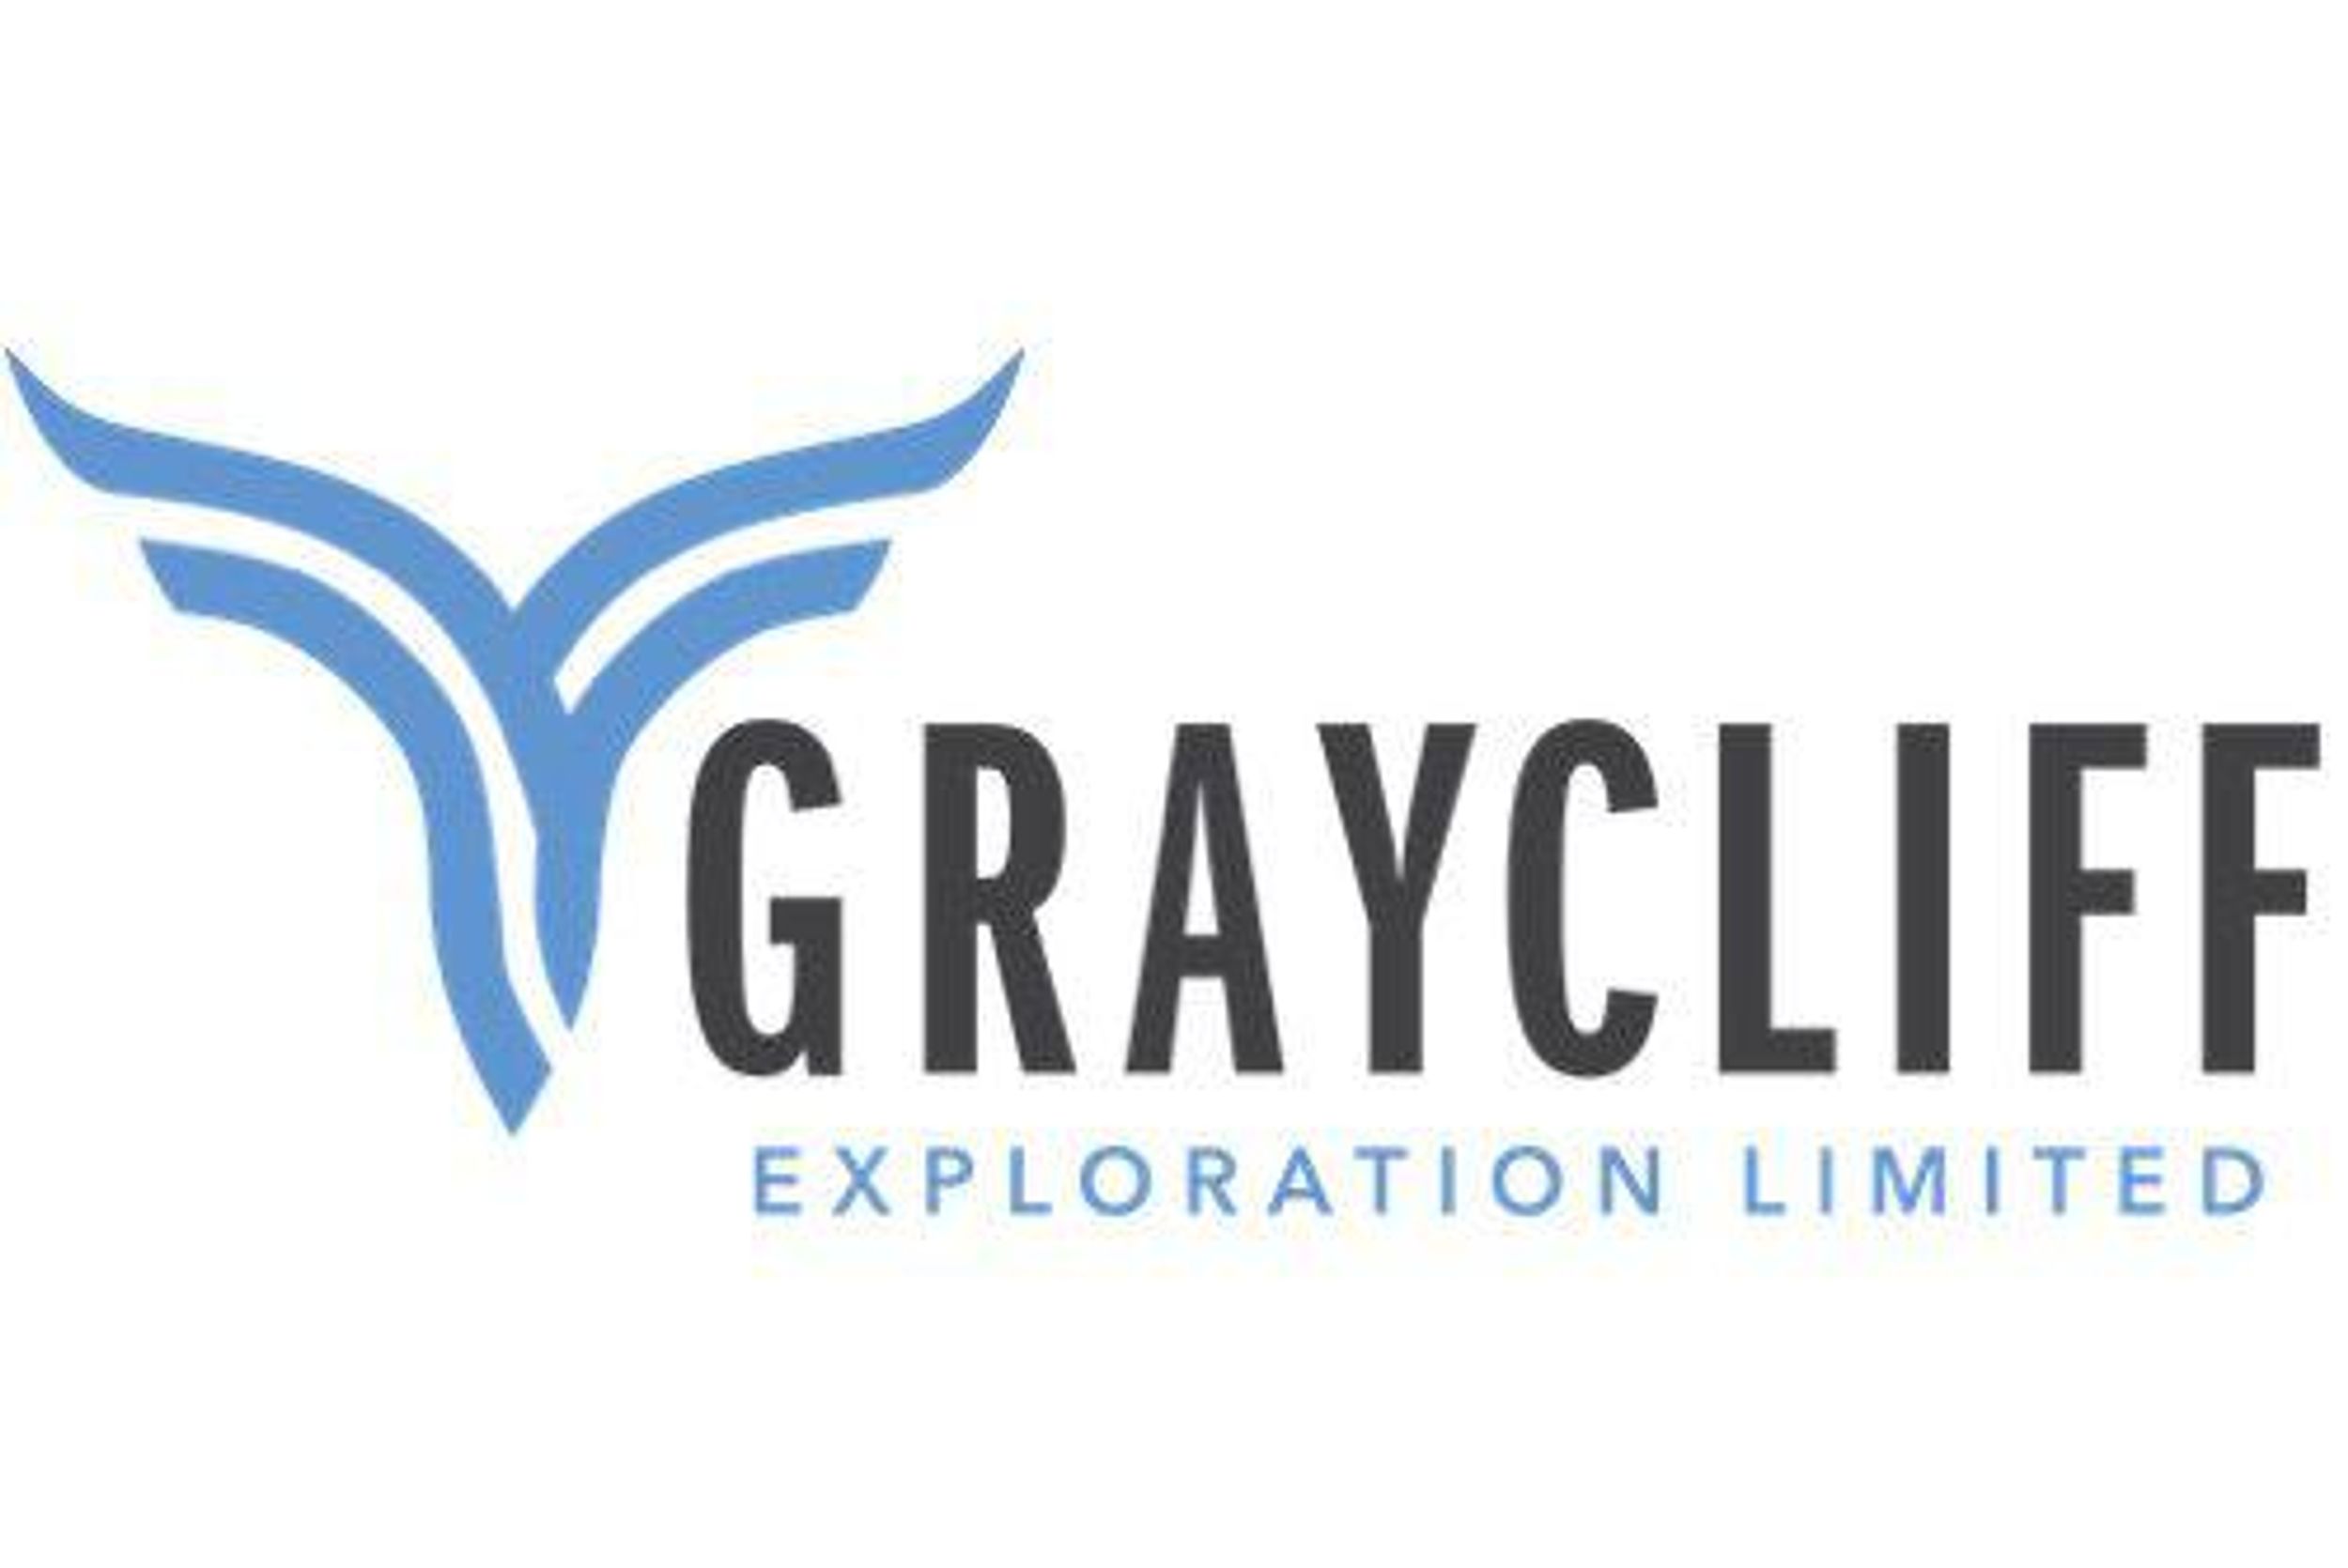 Graycliff Exploration Invites Shareholders and Investment Community to Visit Us at Booth 301 at the VRIC in Vancouver, May 17-18, 2022